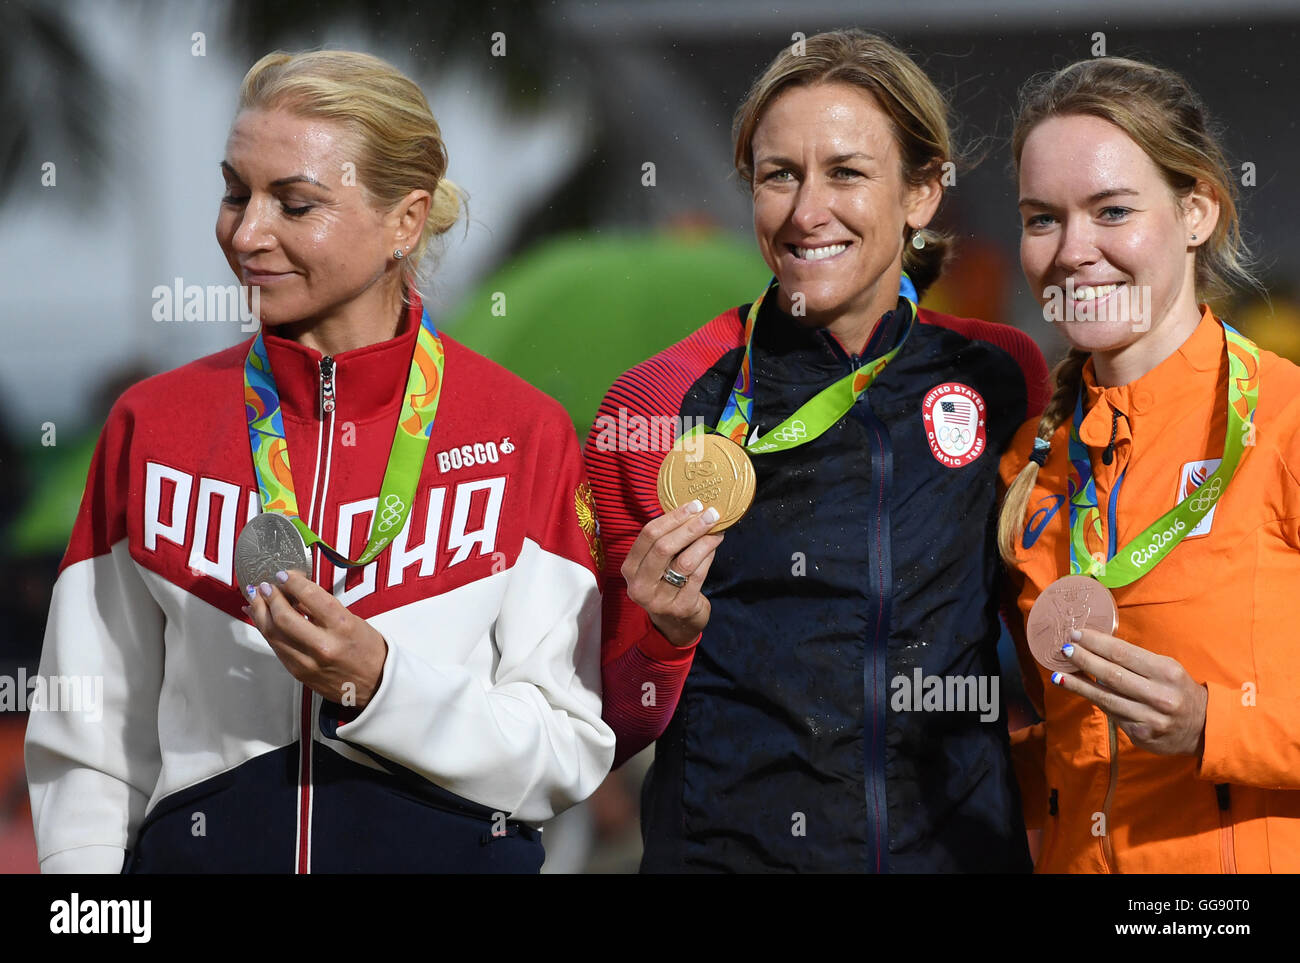 Rio de Janeiro, Brazil. 10th Aug, 2016. Kristin Armstrong (C) of the USA poses with her gold medal on the podium after winning the women's Individual Time Trial of the Rio 2016 Olympic Games Road Cycling events at Pontal in Rio de Janeiro, Brazil, 10 August 2016. Armstrong won ahead of second placed Olga Zabelinskaya (L) of Russia and third placed Anna van der Breggen (R) of the Netherlands. Photo: Soeren Stache/dpa/Alamy Live News Stock Photo